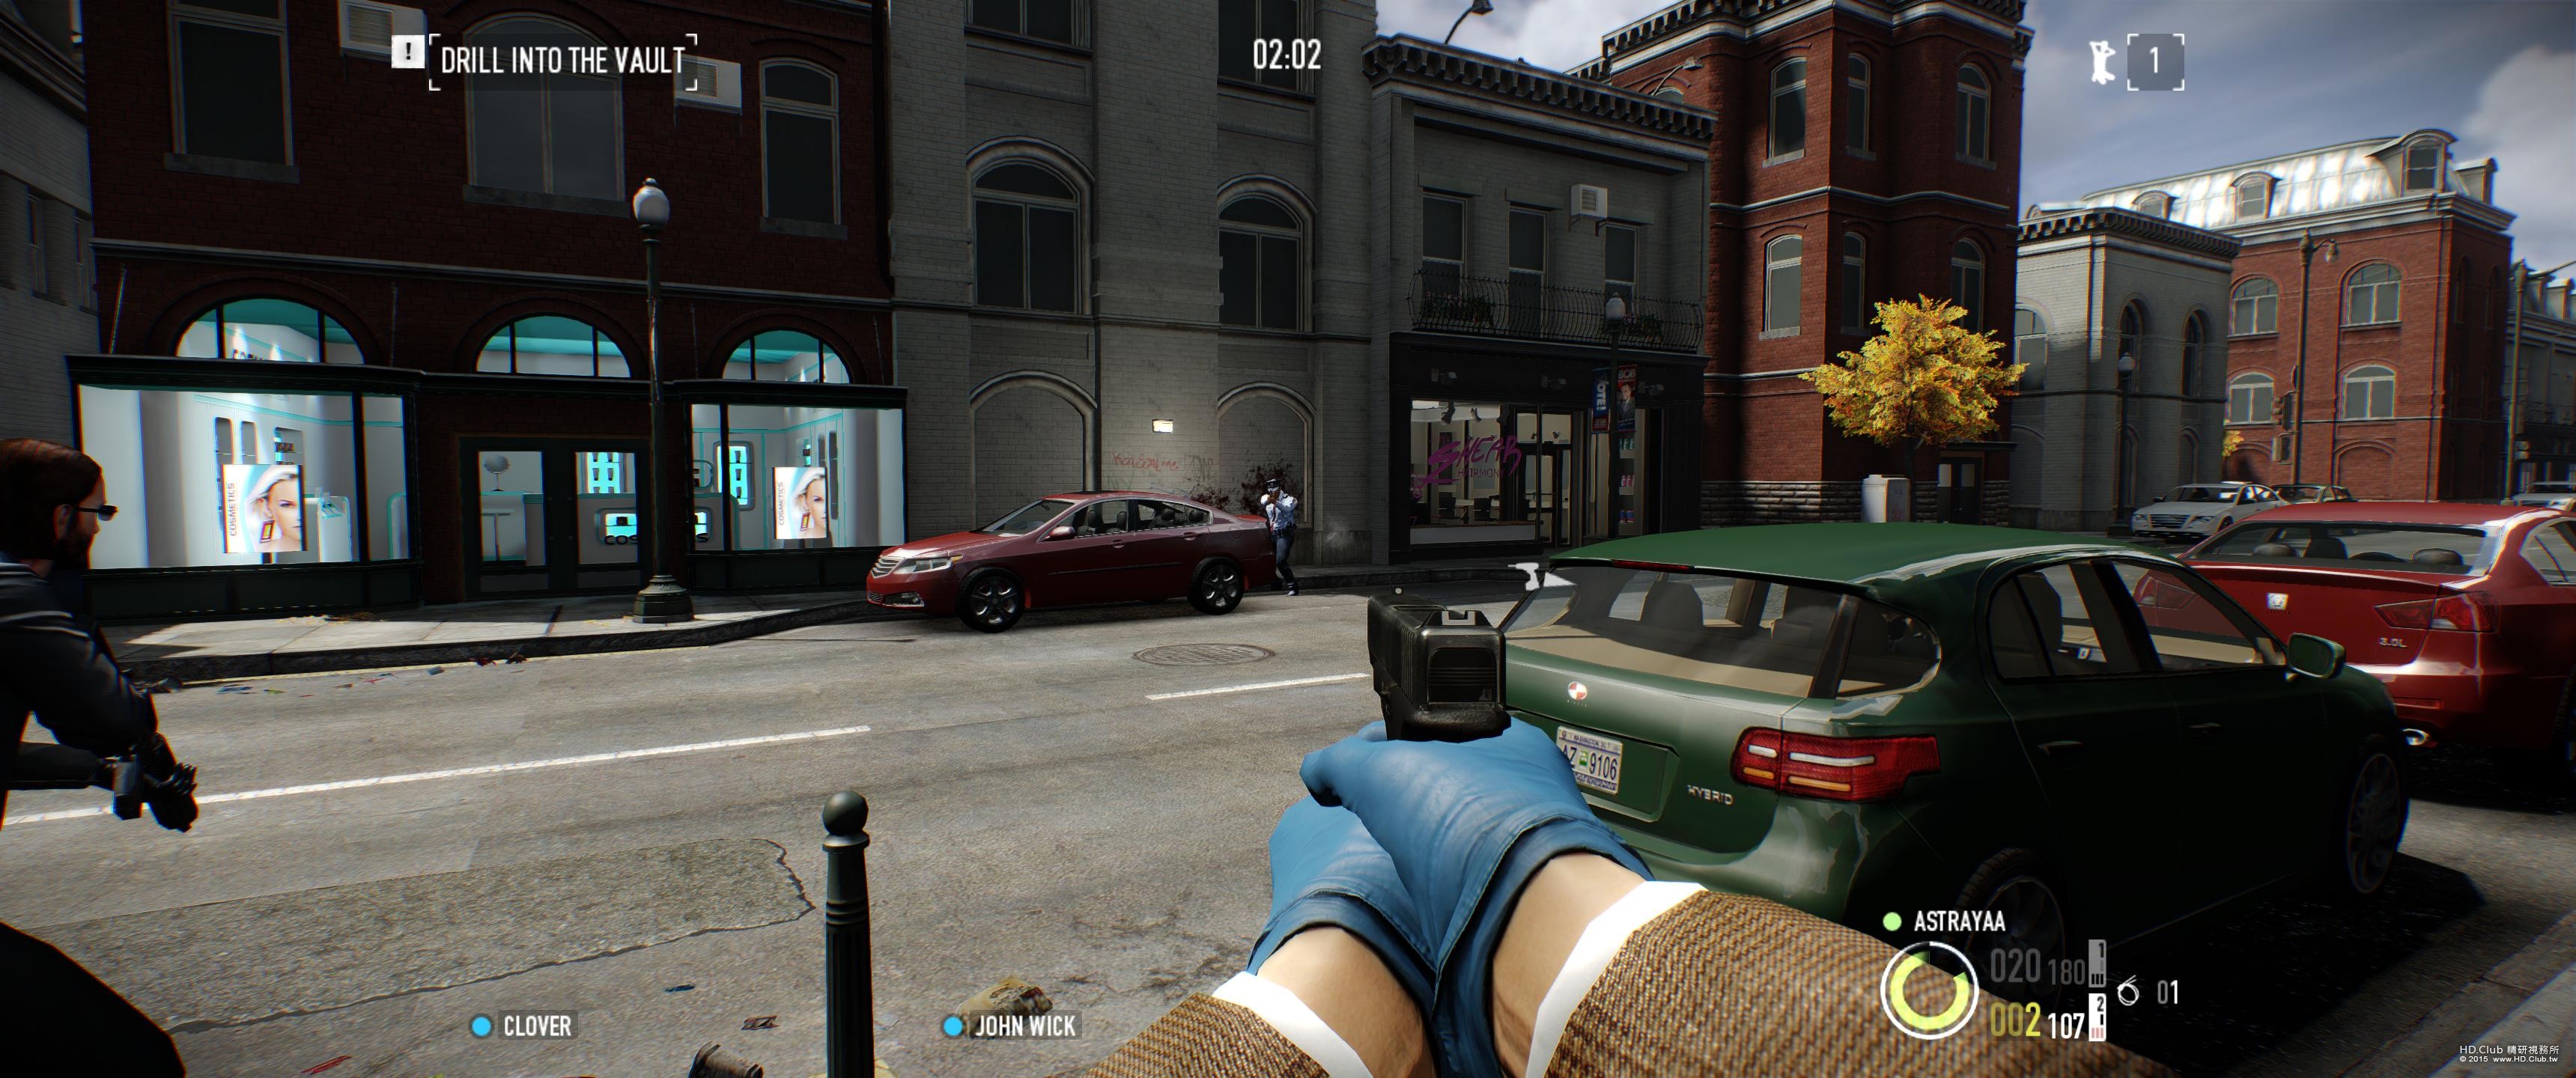 payday2_win32_release 2015-09-24 06-56-17-24.jpg